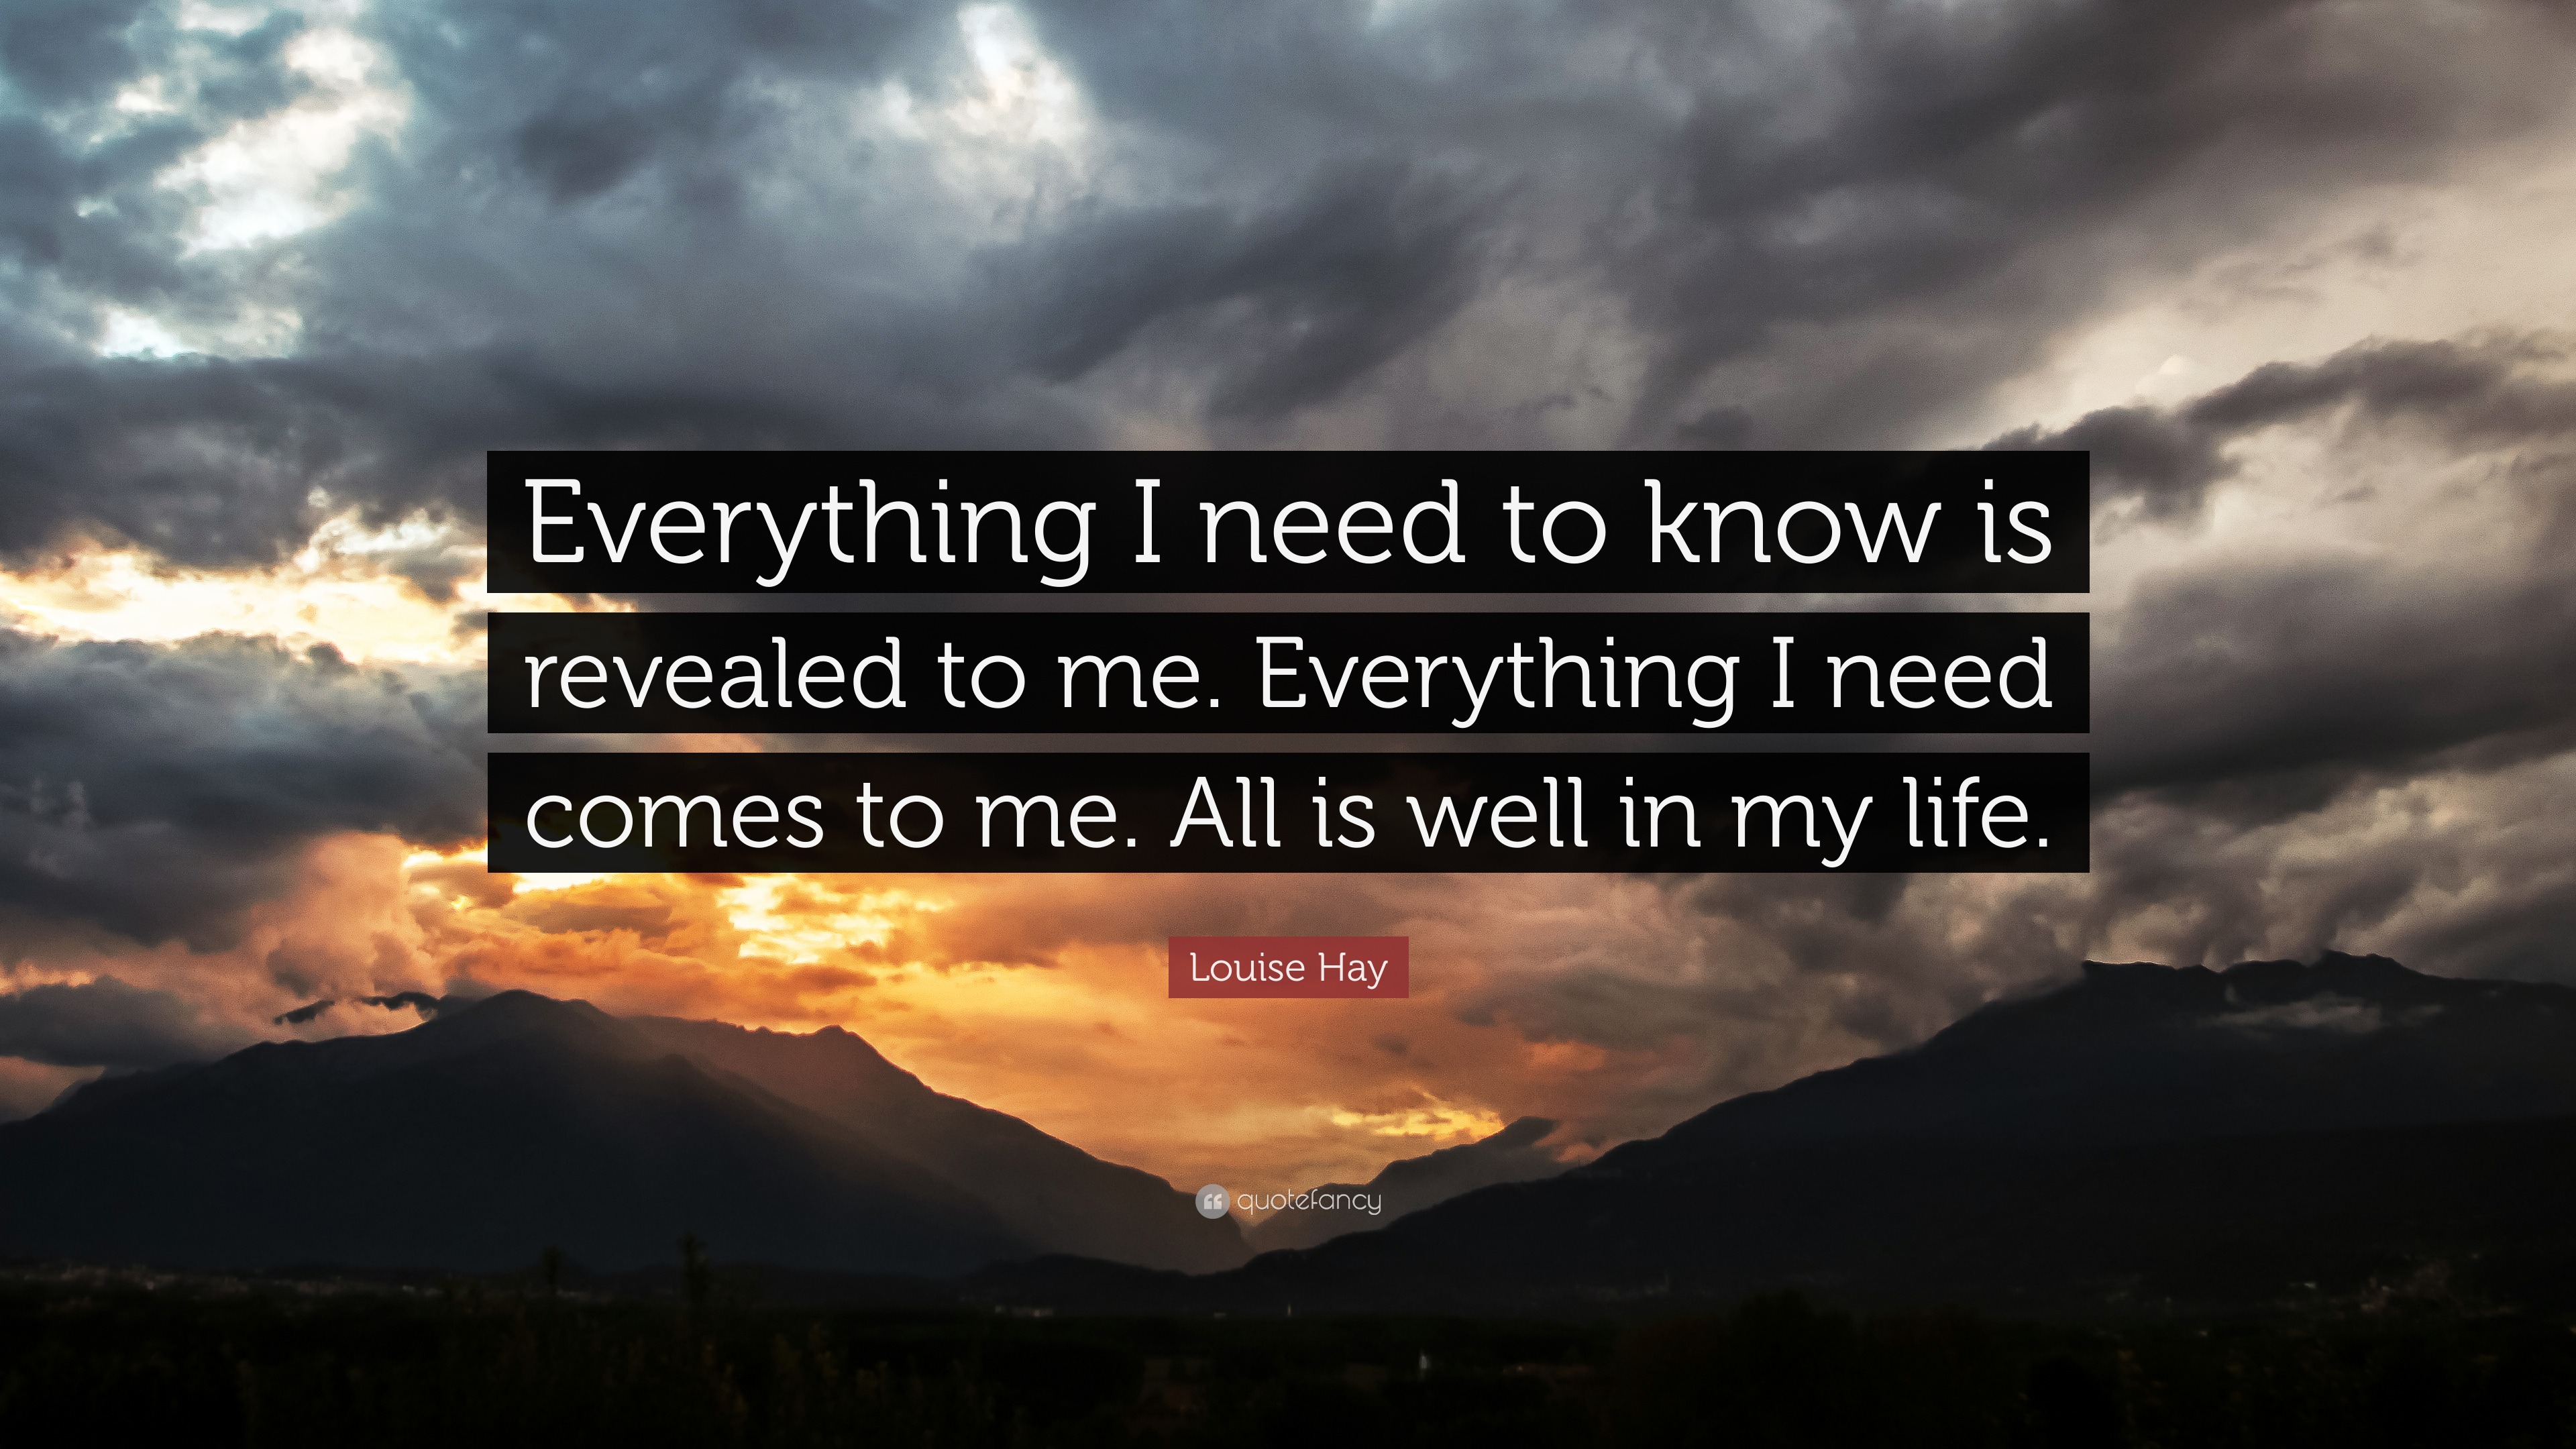 Louise Hay Quote: “Everything I need to know is revealed to me ...